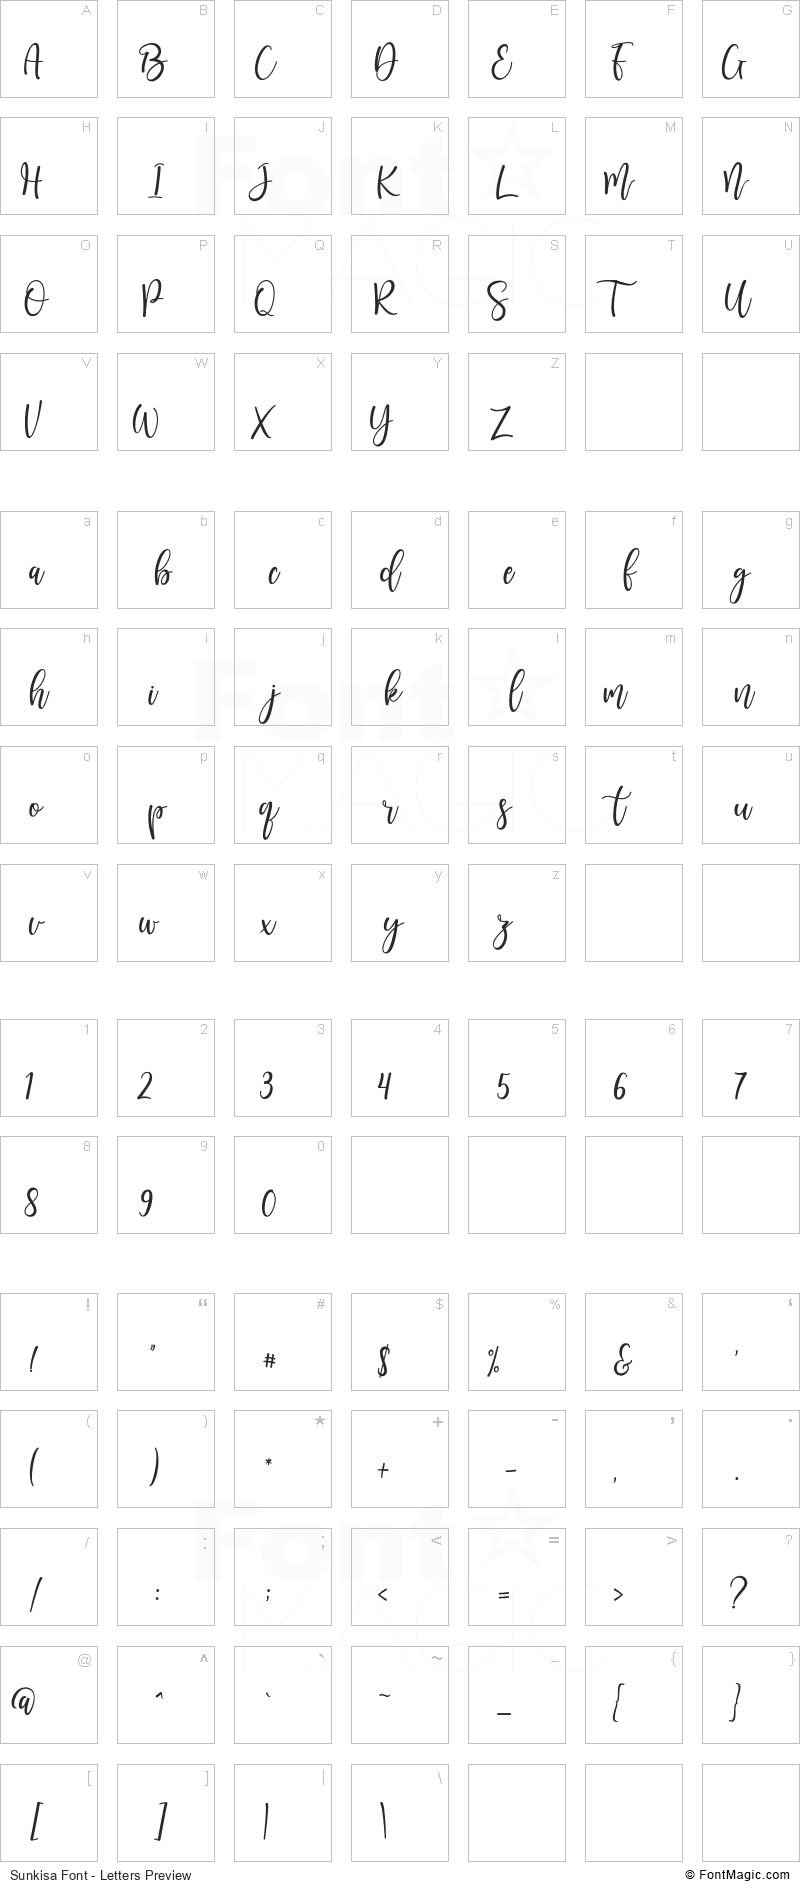 Sunkisa Font - All Latters Preview Chart